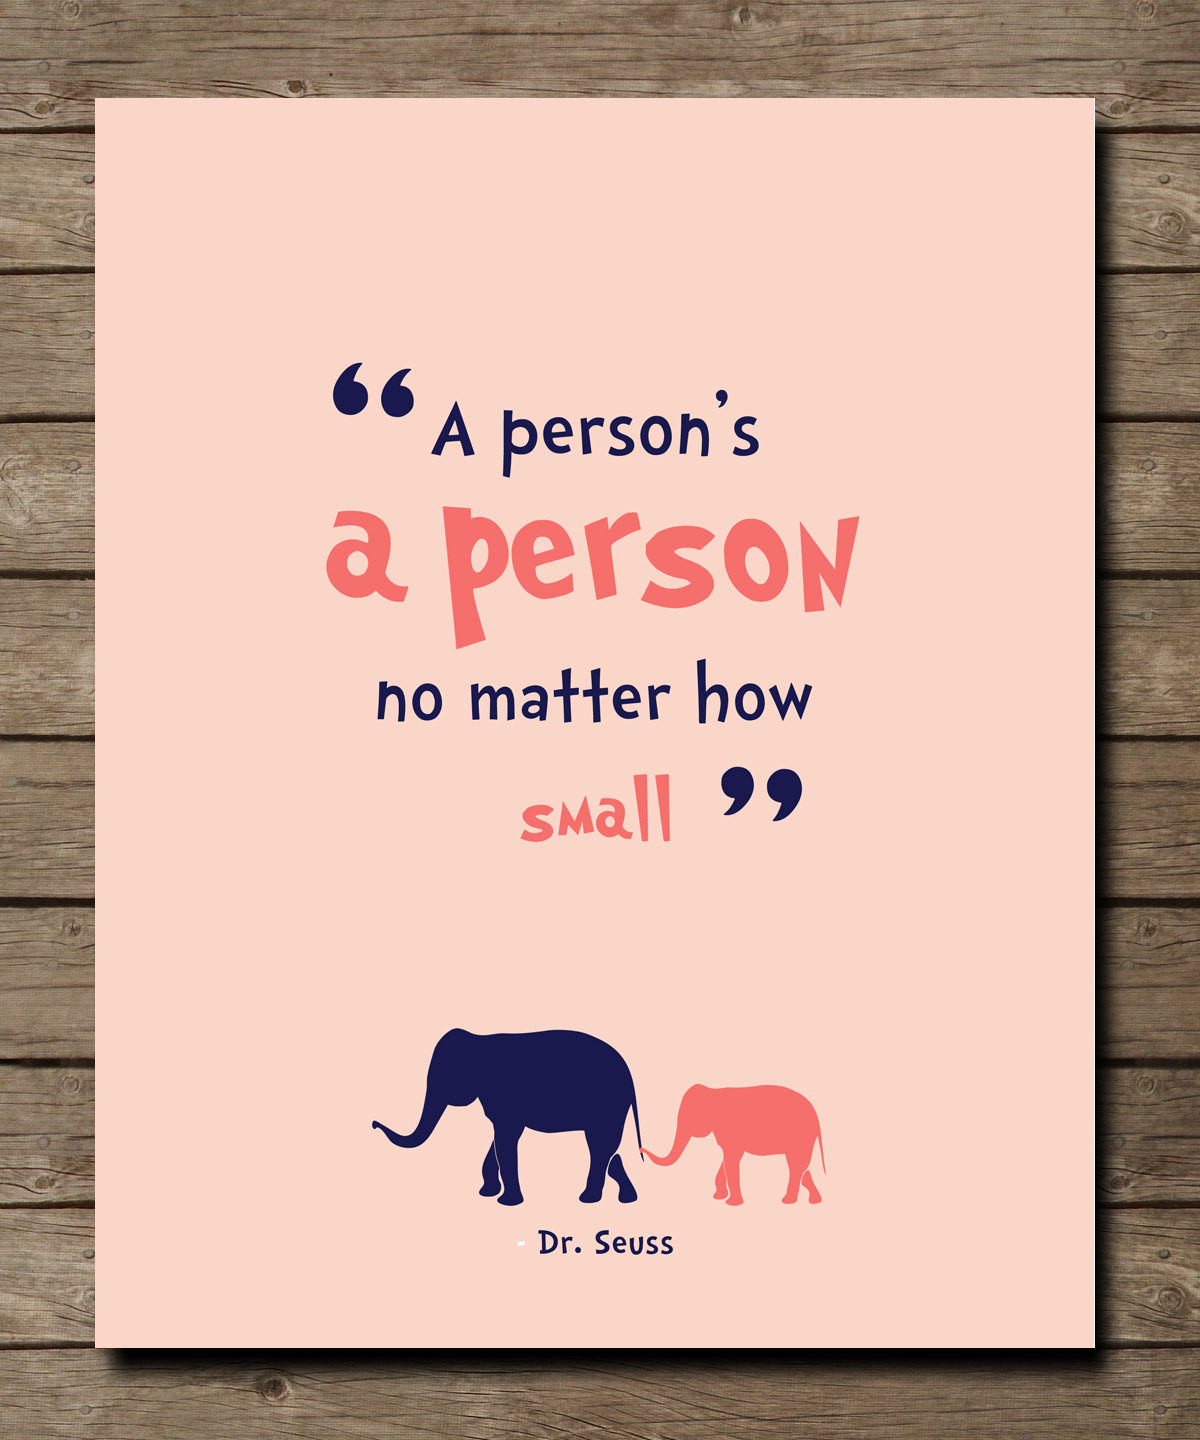 Inspirational Quote Dr Seuss
 Dr Seuss Quote A person s a Person quote Inspiring